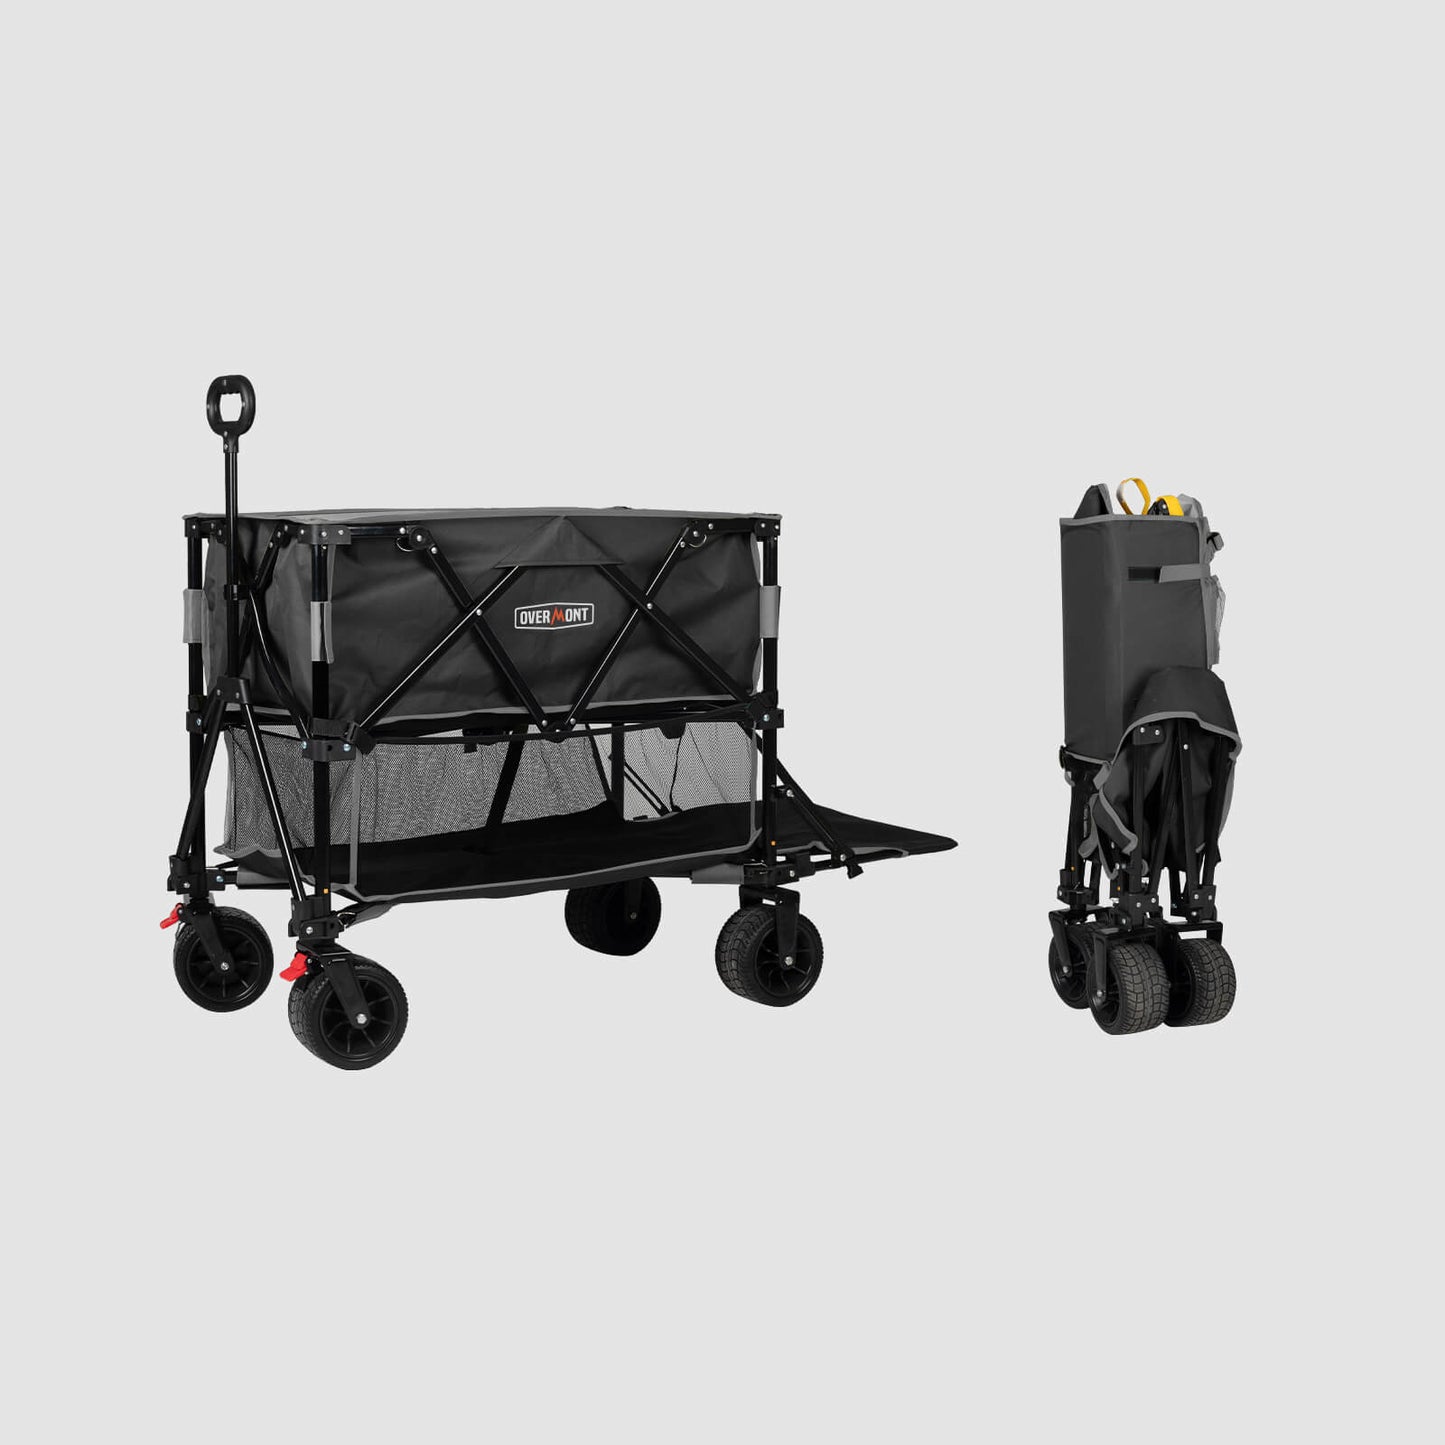 Overmont Foldable Double Decker Wagon Cart